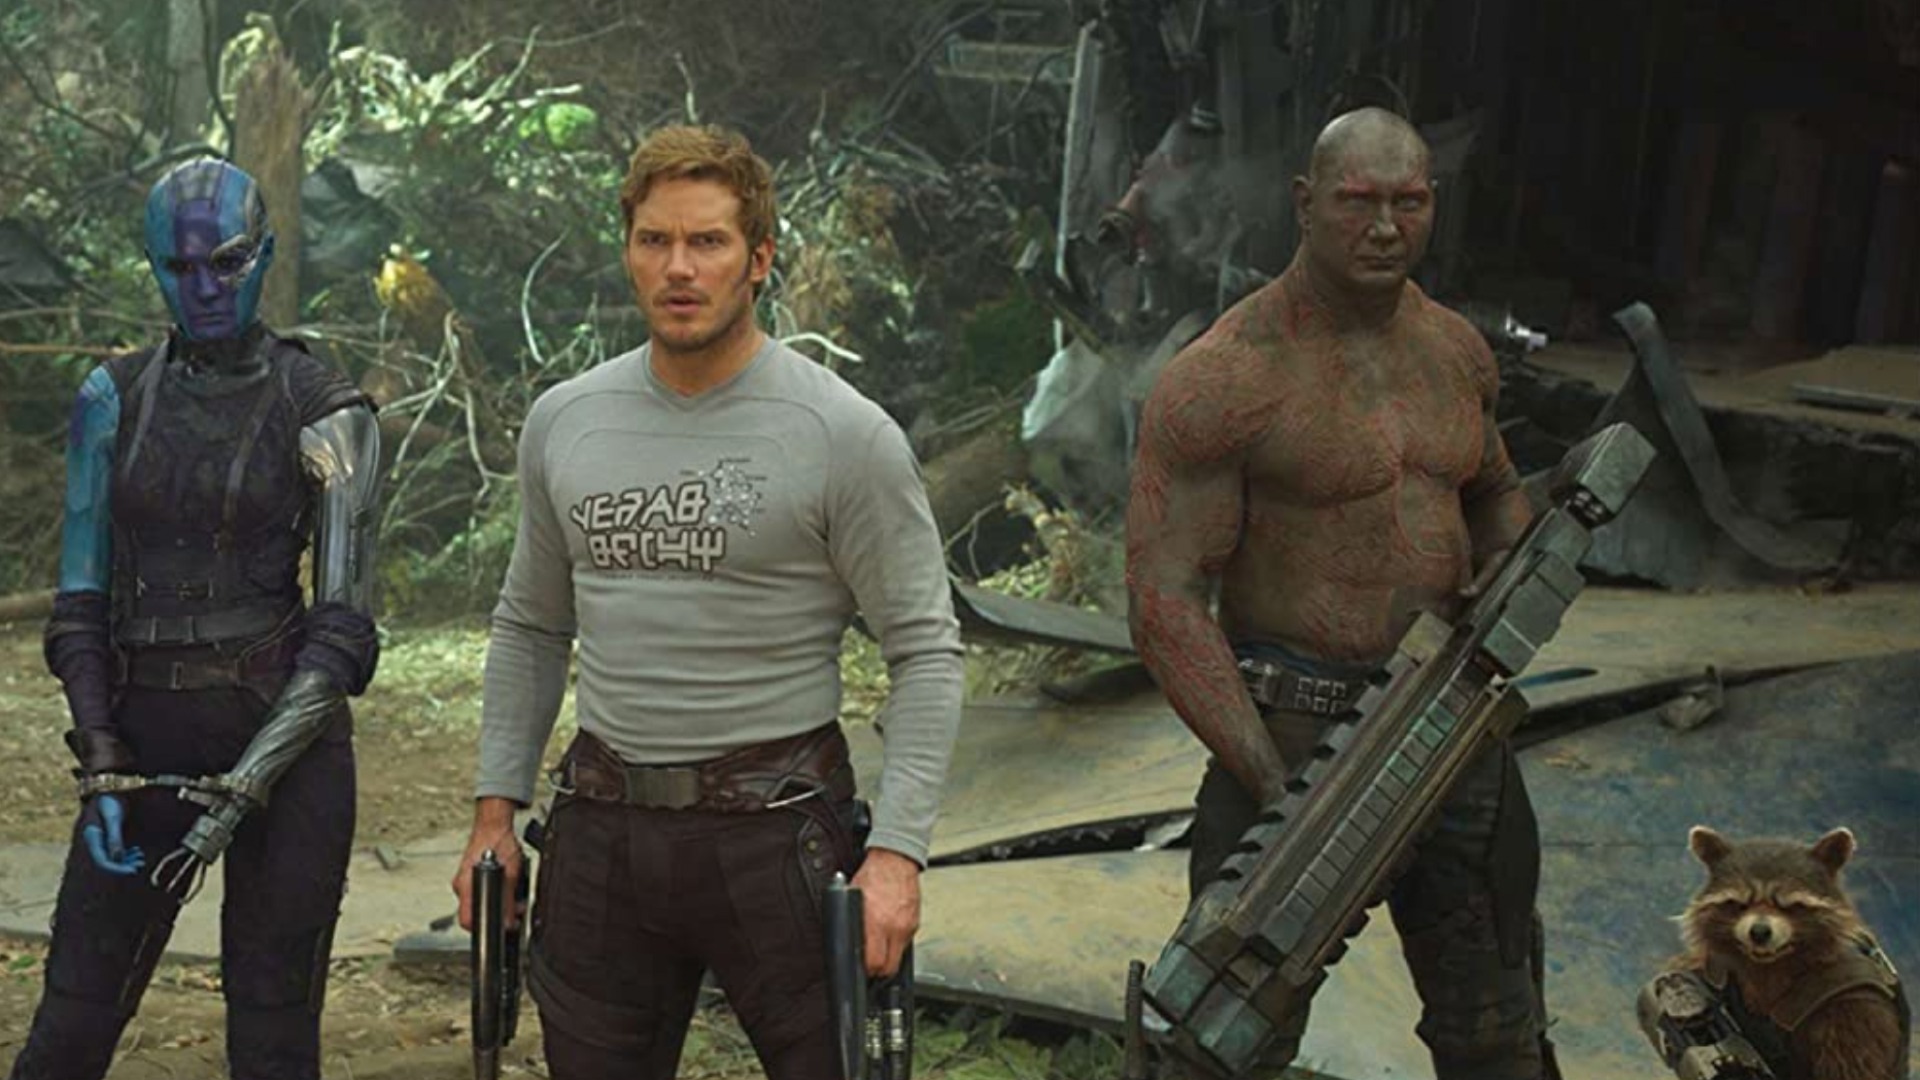 Guardians of the Galaxy Holiday Special will be missing a few key heroes, confirms James Gunn